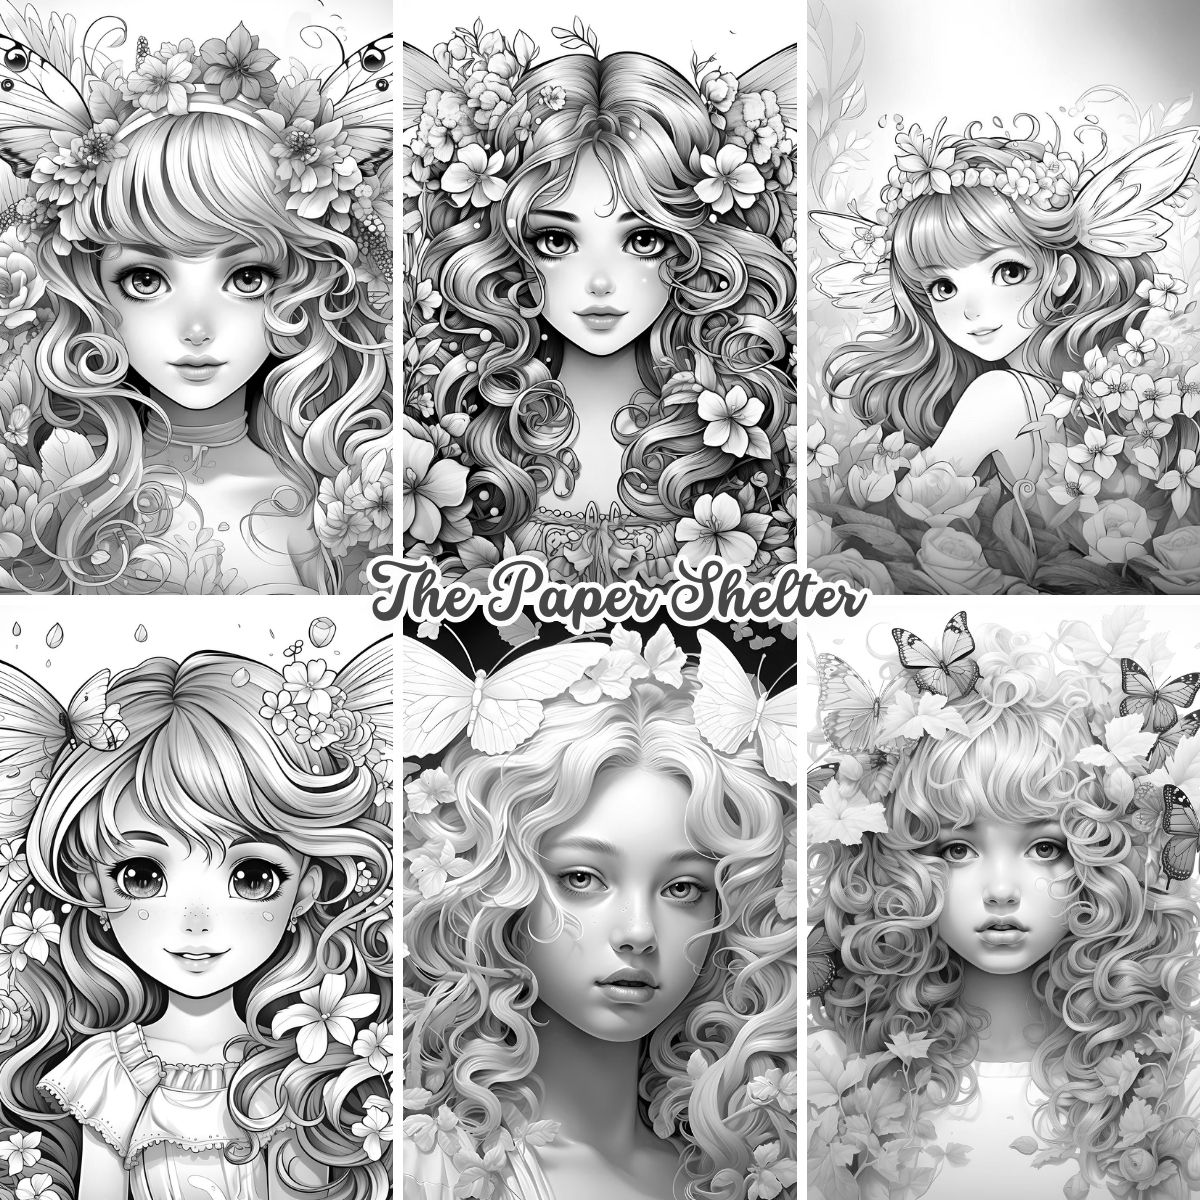 Fairy Tale Faces - Digital Coloring Book - Click Image to Close